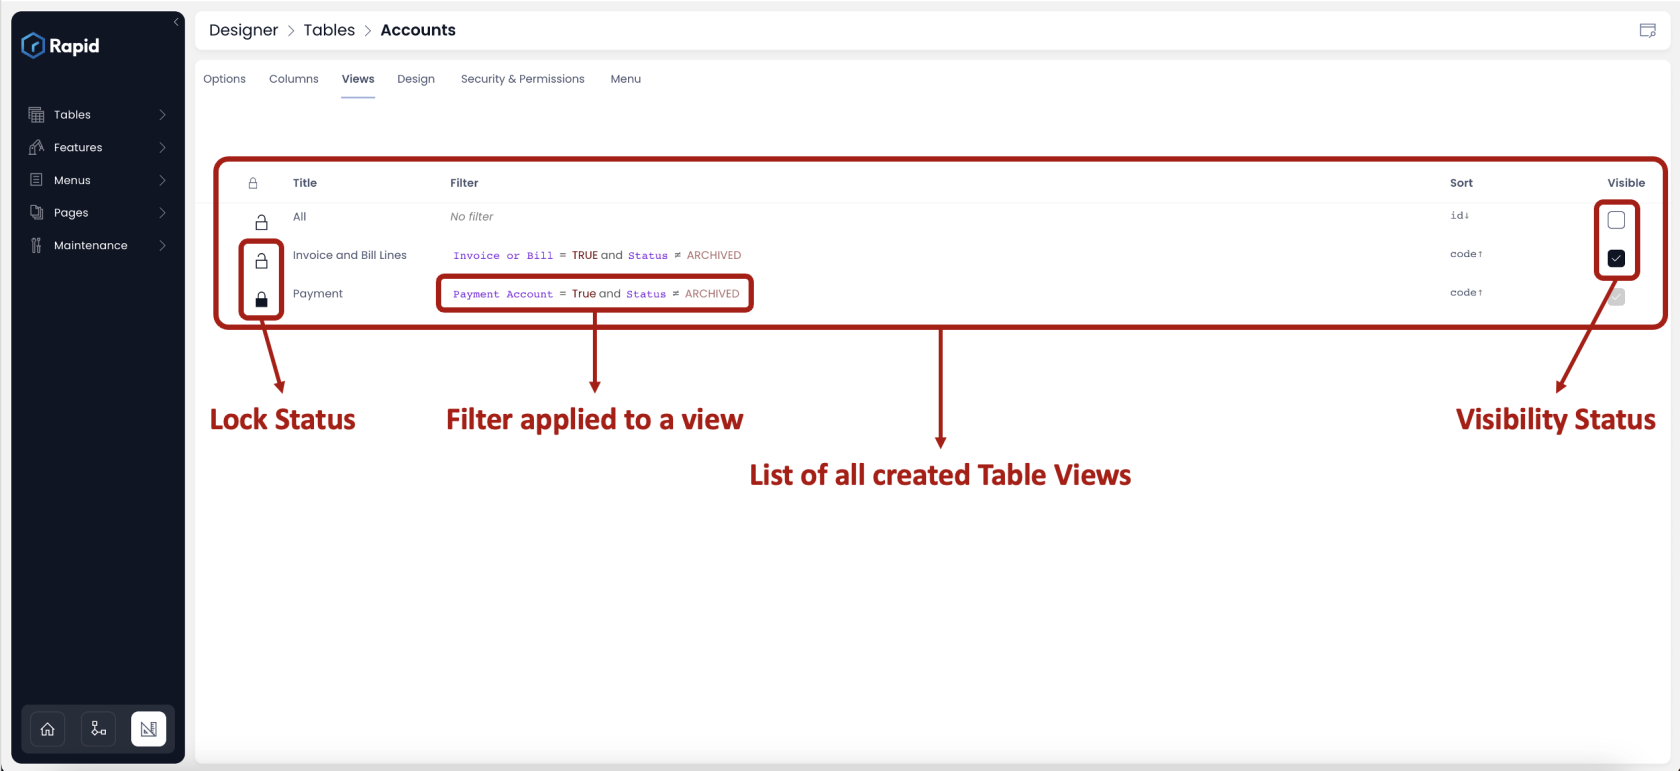 Anatomy of the Table Views page